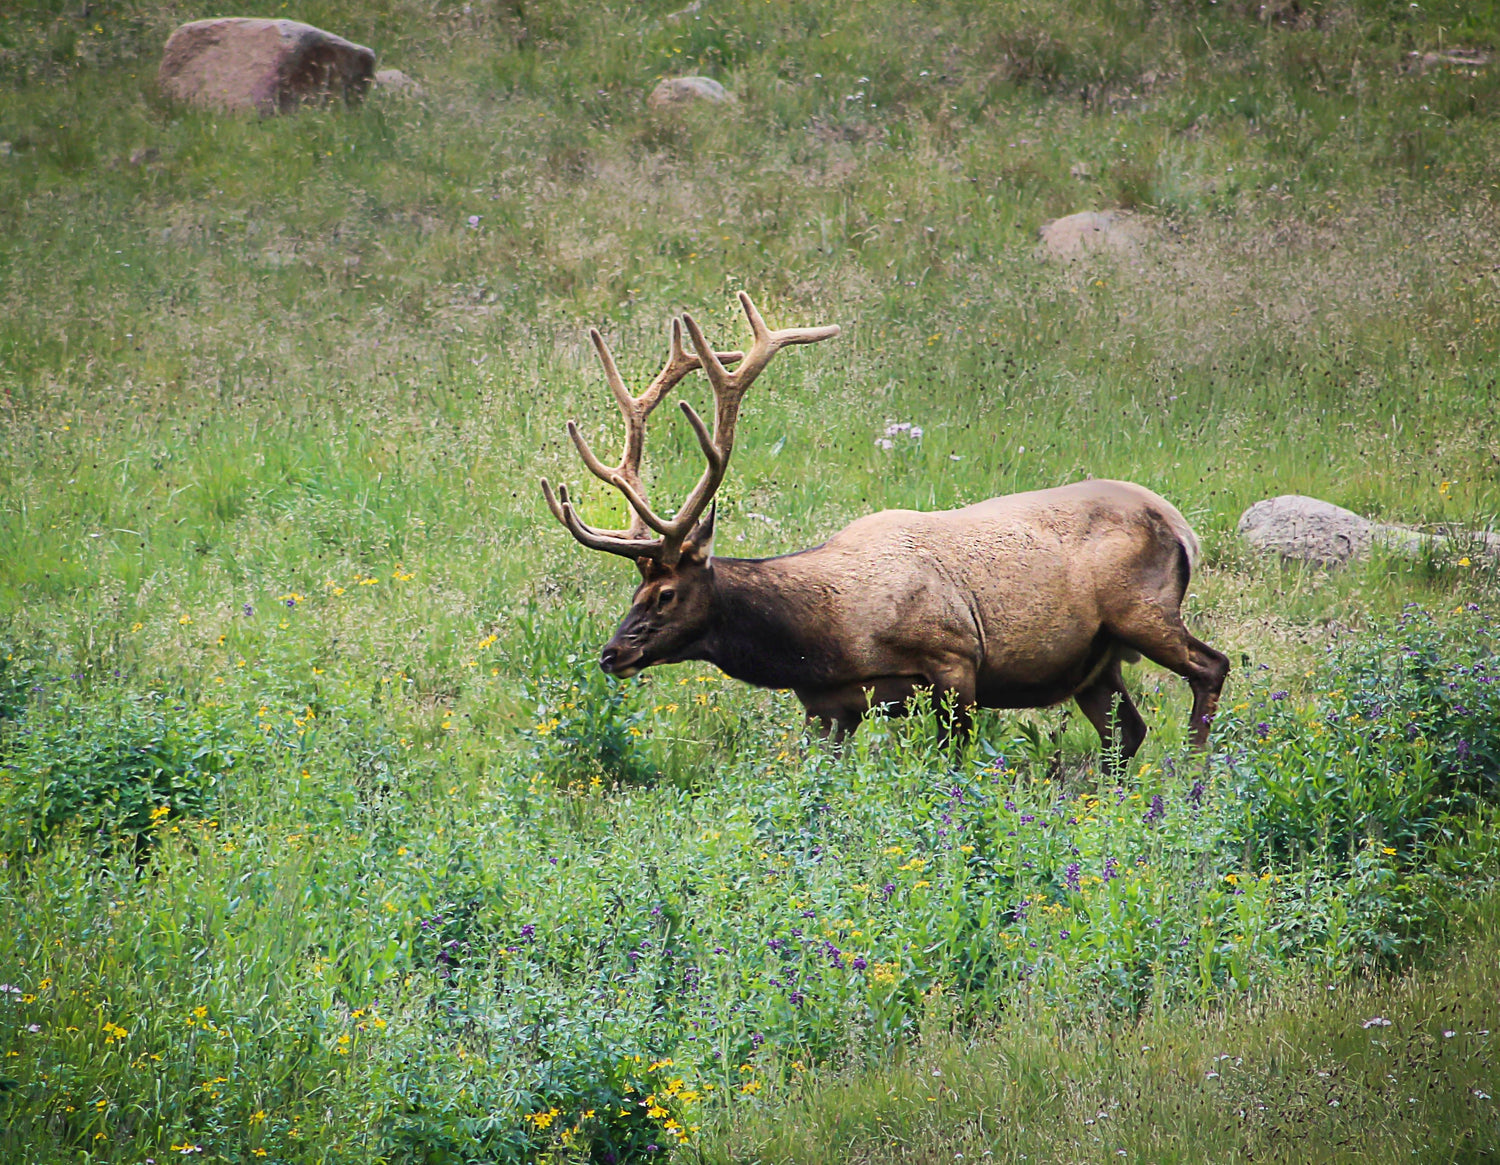 The Reintroduction of Elk in the Blue Ridge Mountains